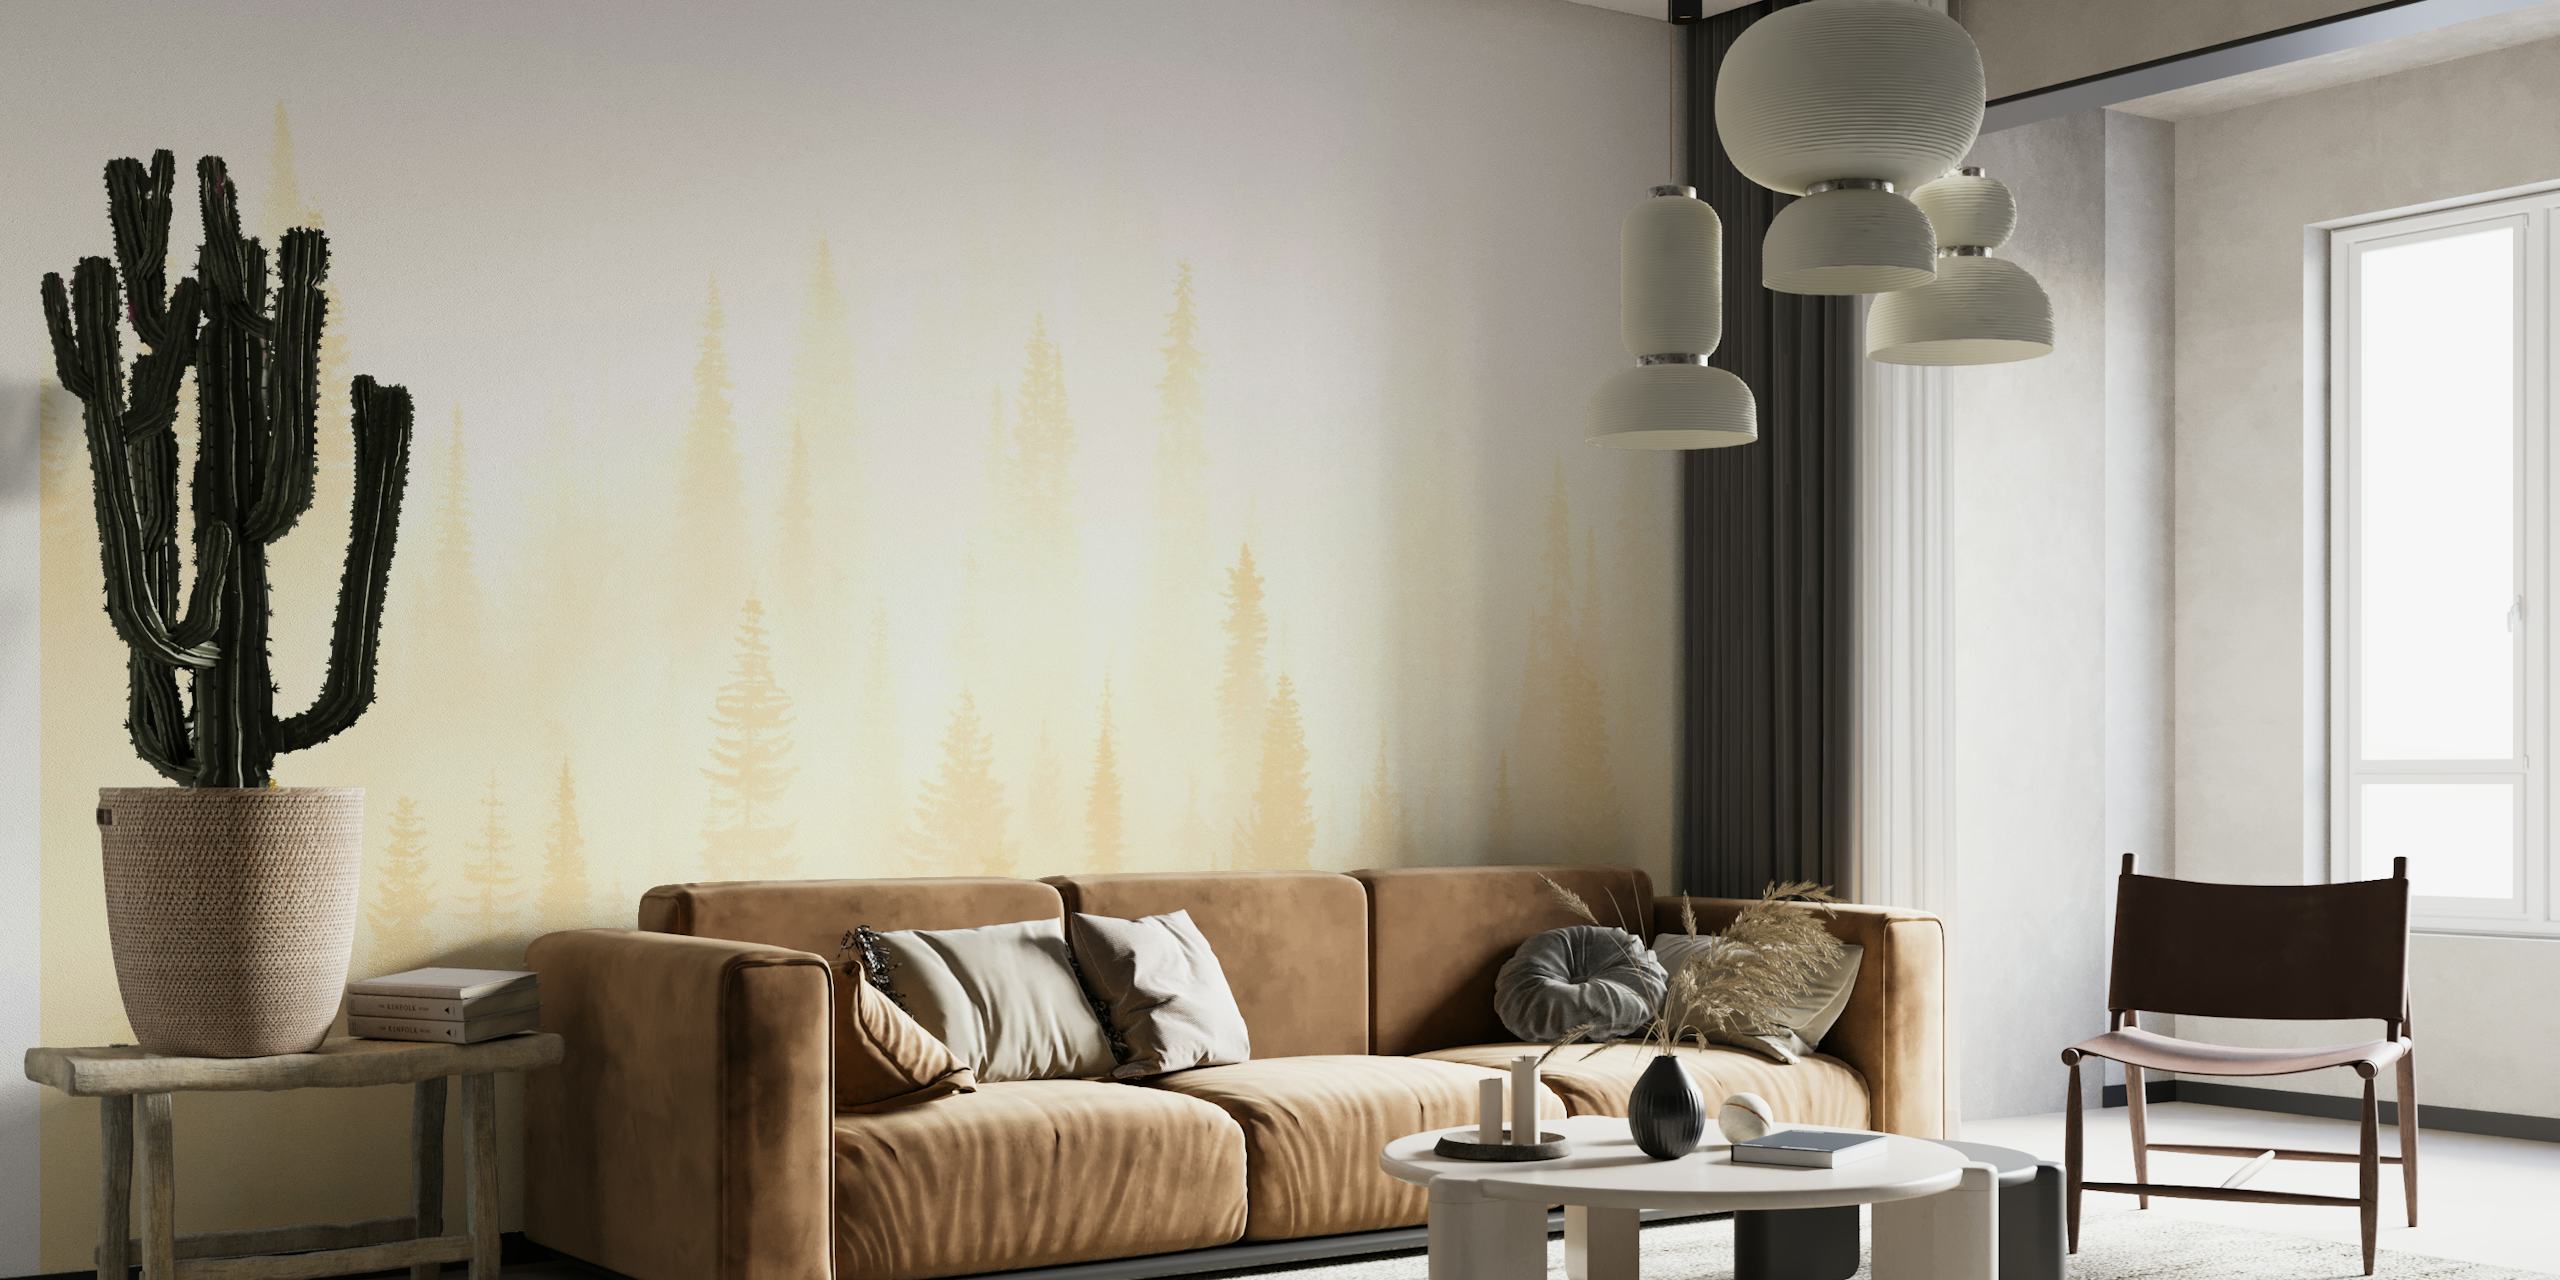 Misty forest yellow papel pintado